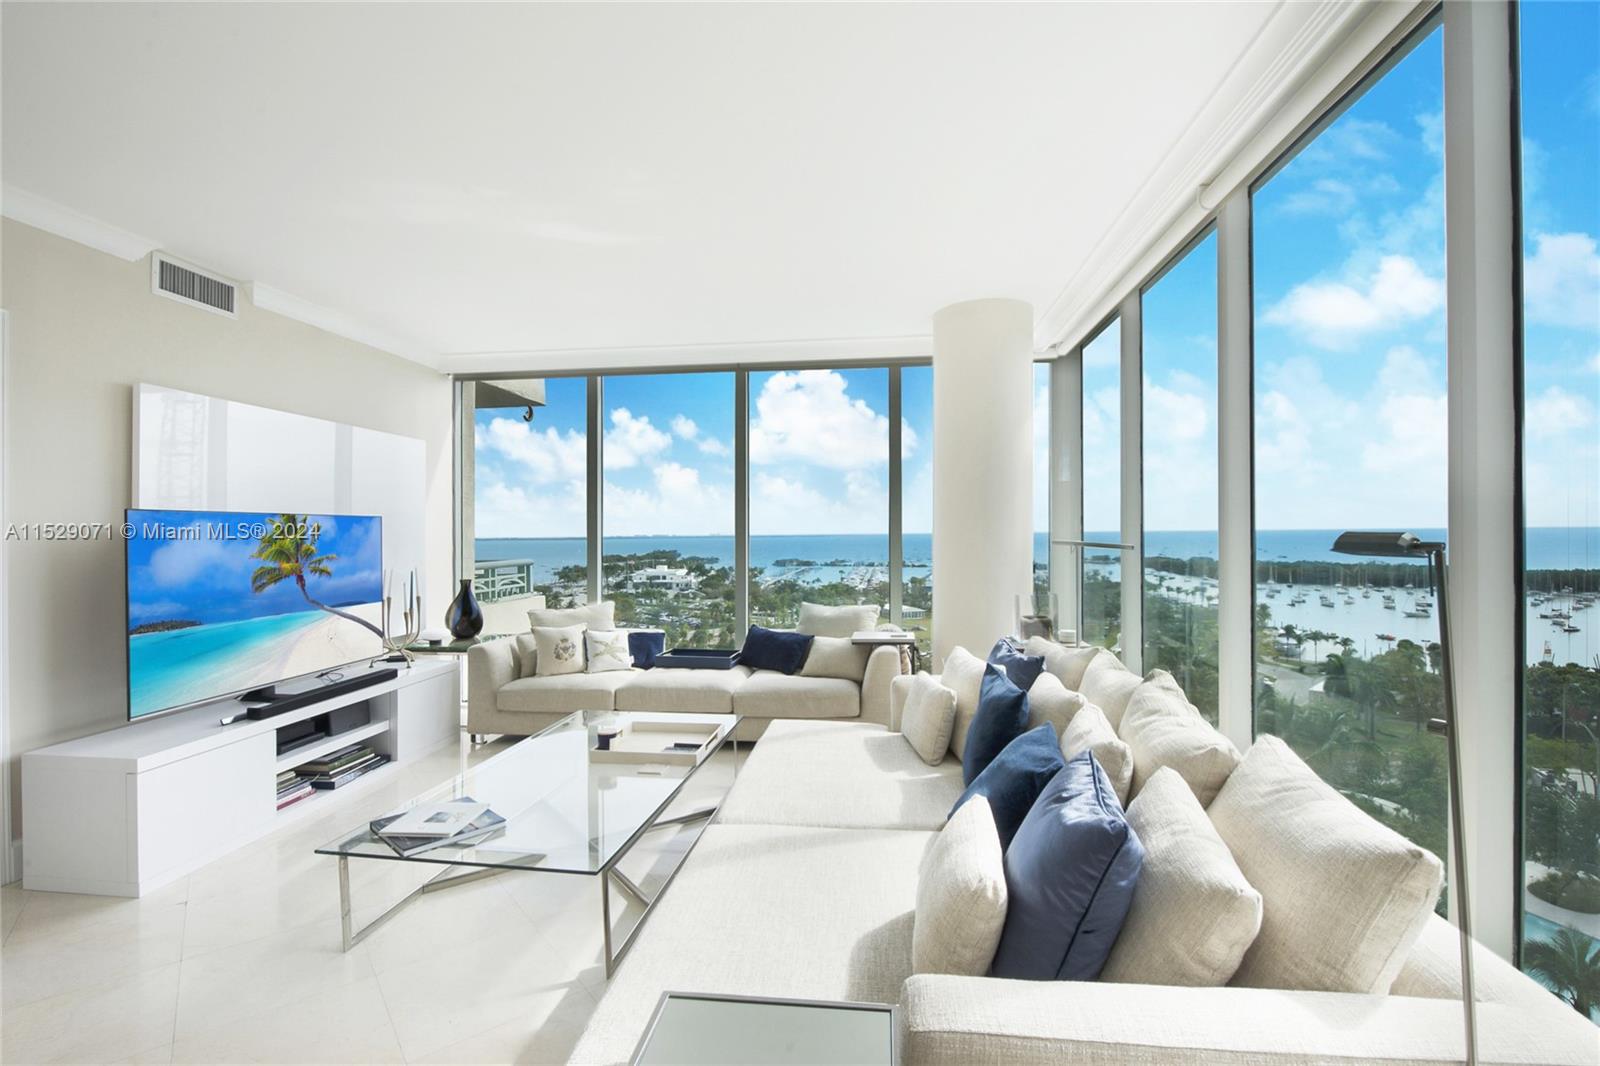 Fully furnished rental with direct unobstructed waterfront views from the floor to ceiling windows and private terraces of this coveted “03” line corner unit at the Ritz-Carlton residences in Coconut Grove. Legendary Ritz-Carlton luxury and lifestyle in the heart of Coconut Grove across from Biscayne Bay, Regatta park and the marina. Access to all 5-star hotel amenities including full-service pool, spa, fitness center, restaurants & bars, concierge and valet parking plus residents-only amenities. Walking distance to waterfront parks, restaurants, shops and entertainment. Easy drive to Miami Beach, Downtown Miami, Coral Gables and the Miami International Airport. Available 5/1/24 - 10/31/24. No pets.